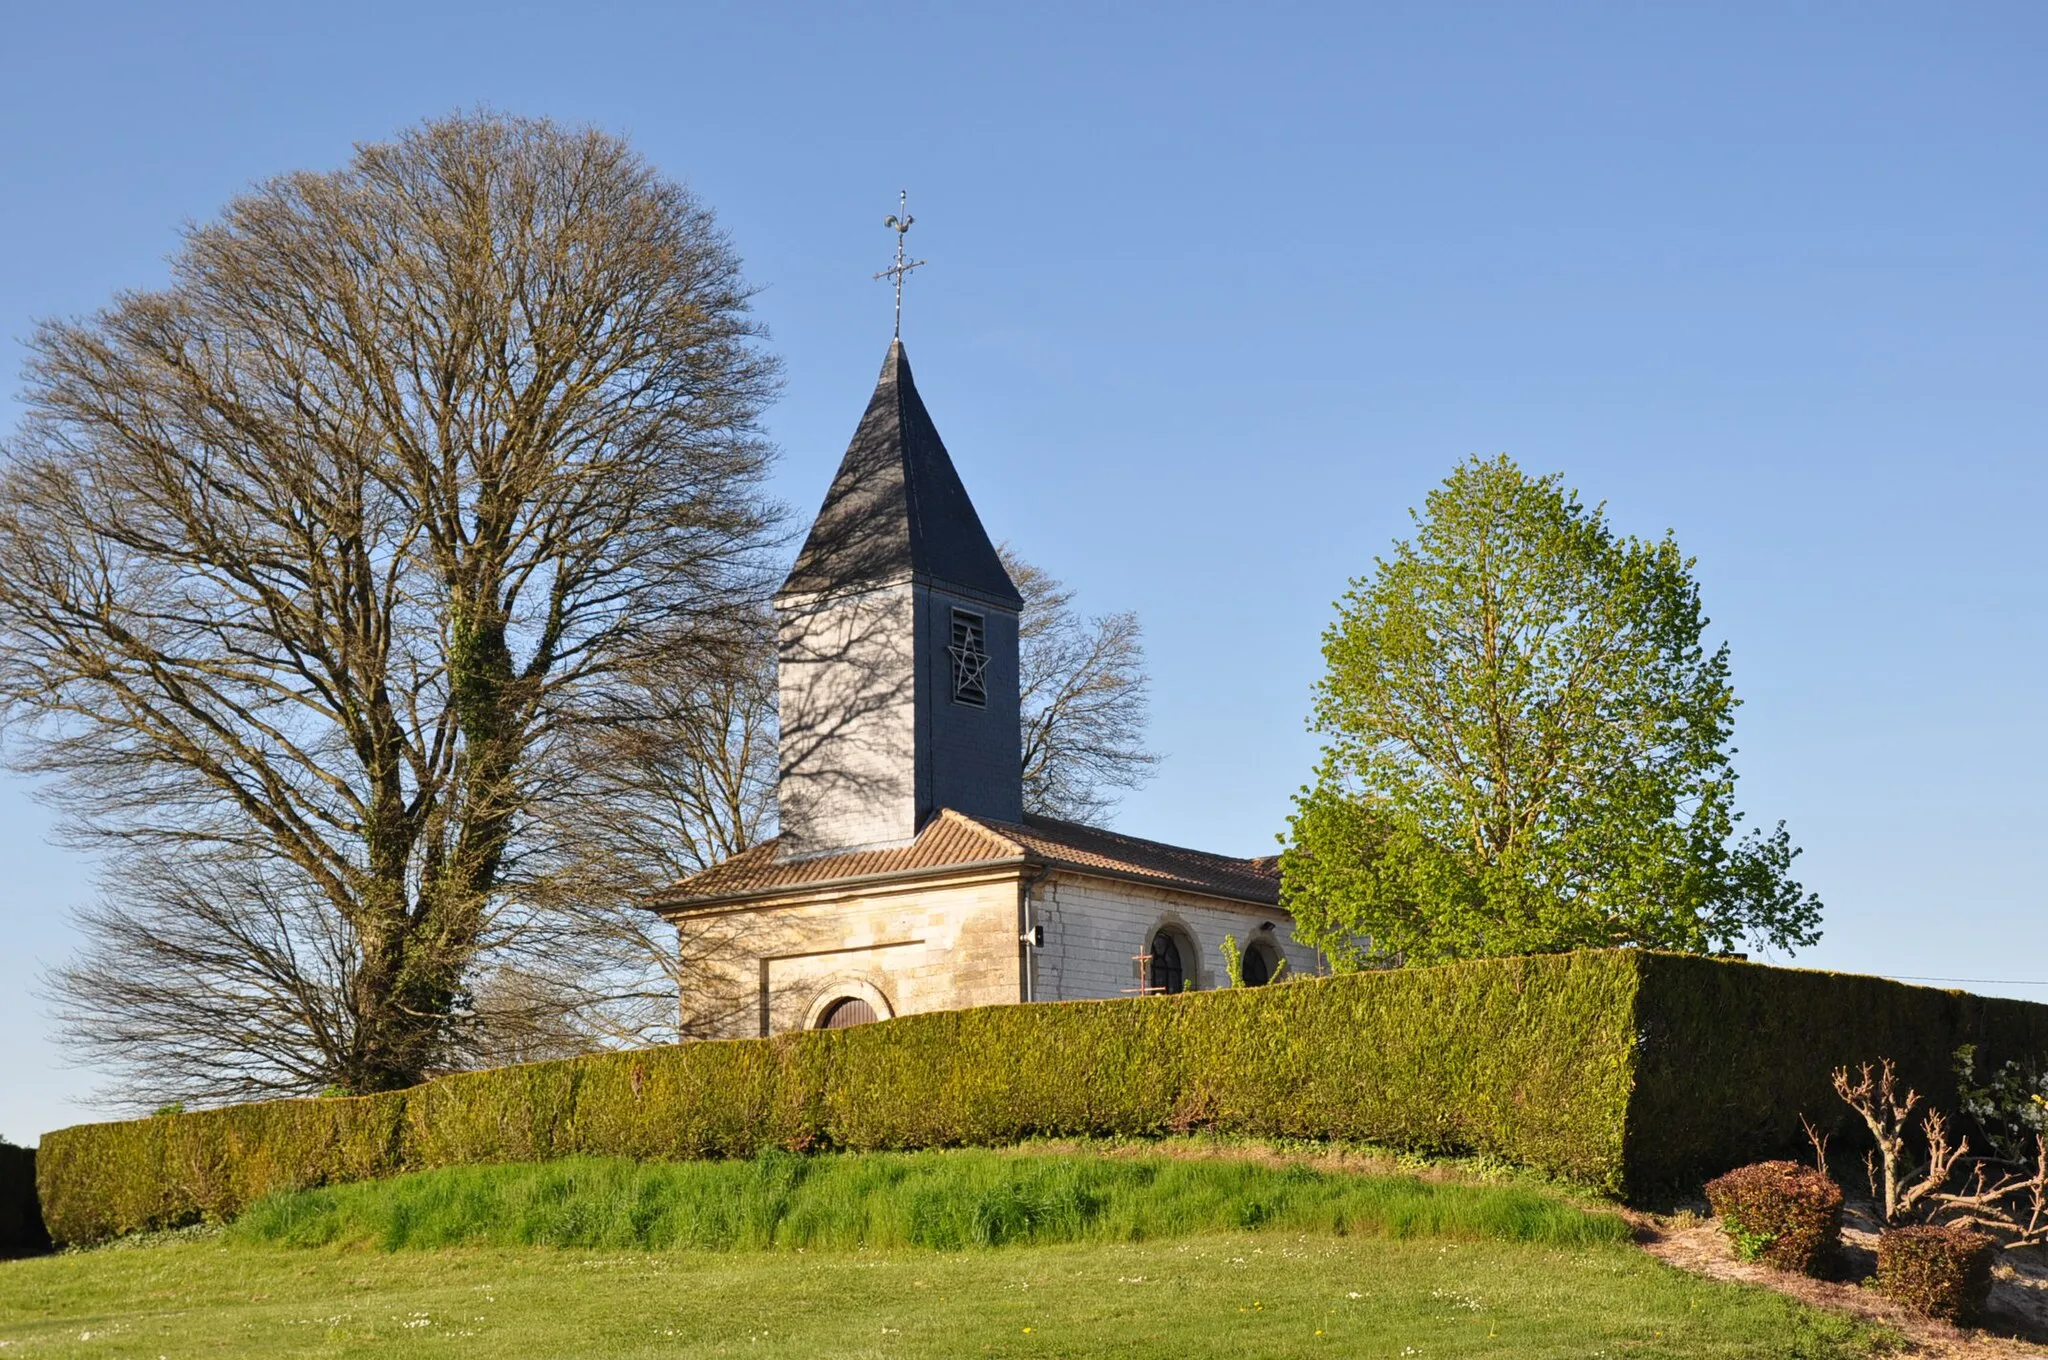 Photo showing: The church of Saint Silvin (Silvinus) in La Croix-en-Champagne (Marne Department, France).